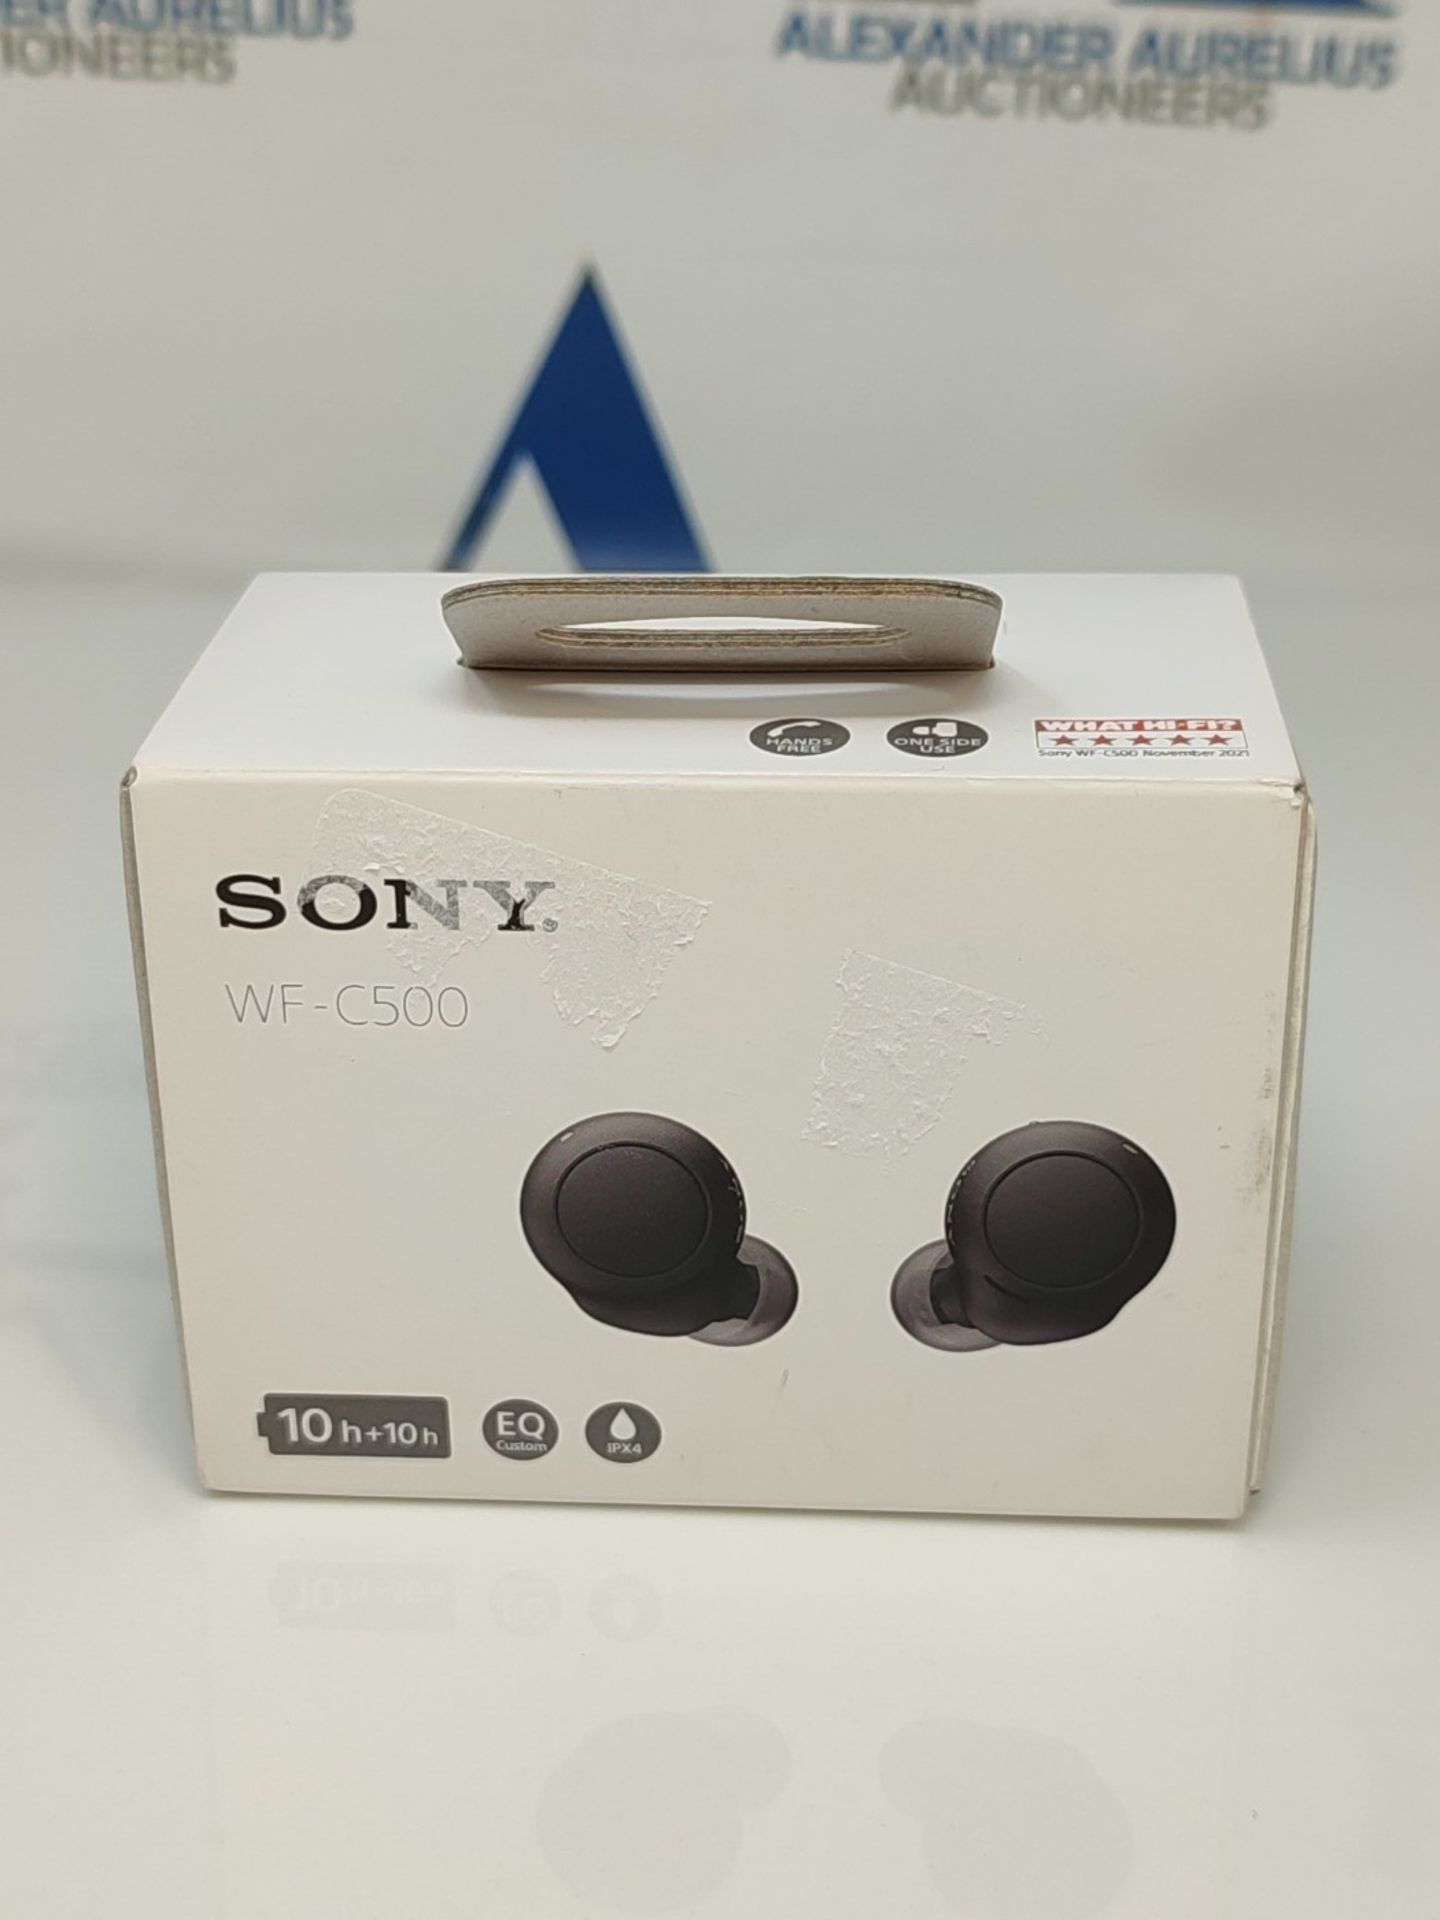 Sony WF-C500 | True Wireless Earphones, Up to 24h Battery Life and Fast Charging, IPX4 - Image 2 of 3